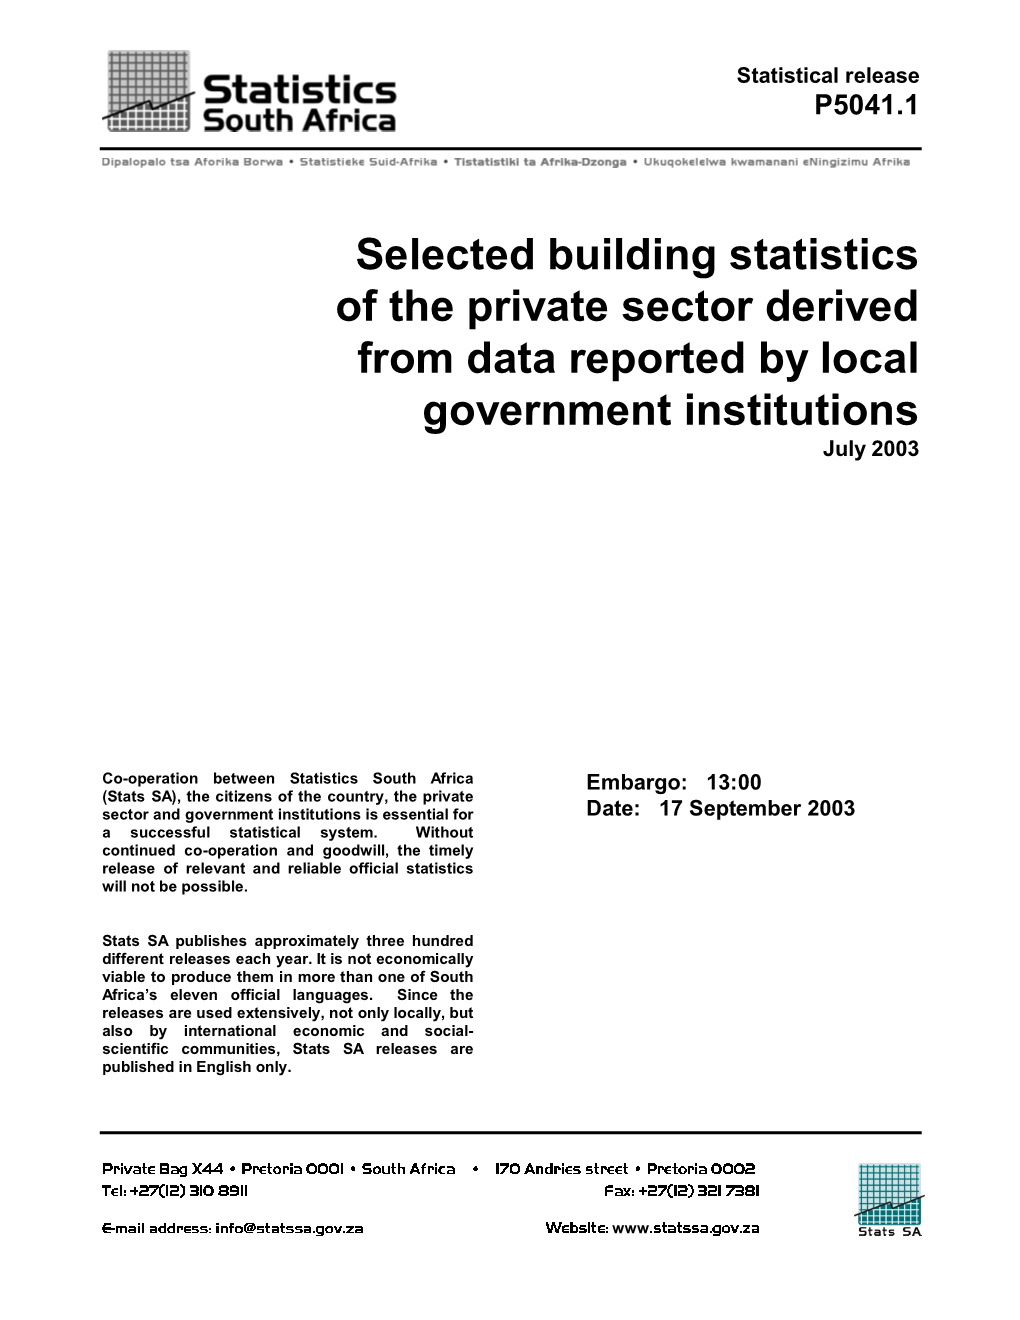 Selected Building Statistics of the Private Sector Derived from Data Reported by Local Government Institutions July 2003